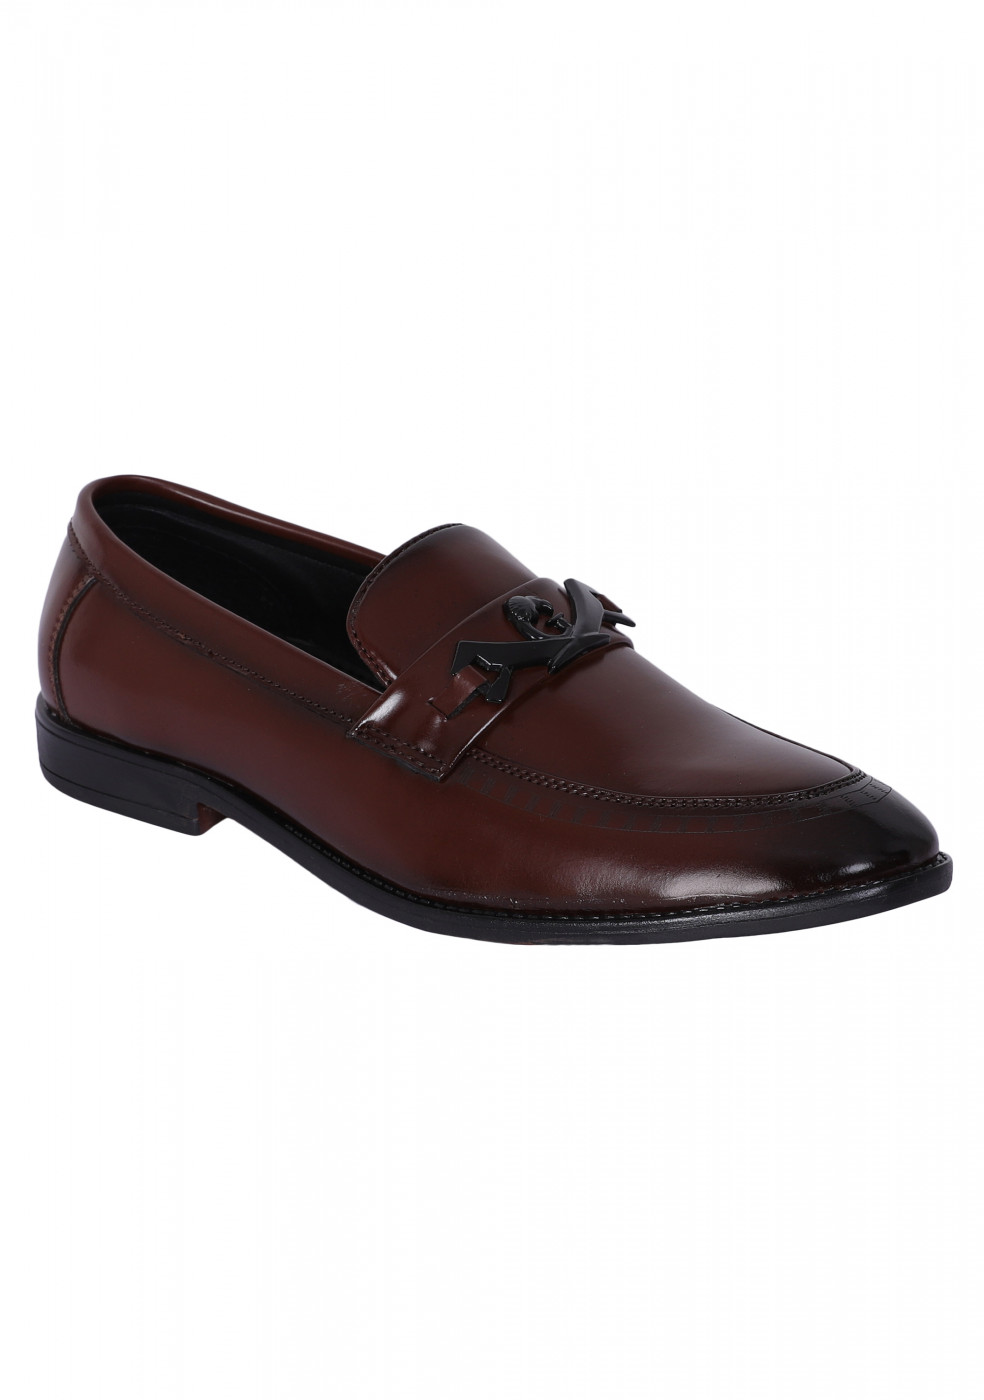 XSTOM Stylish Formal Brown Shoes For Men